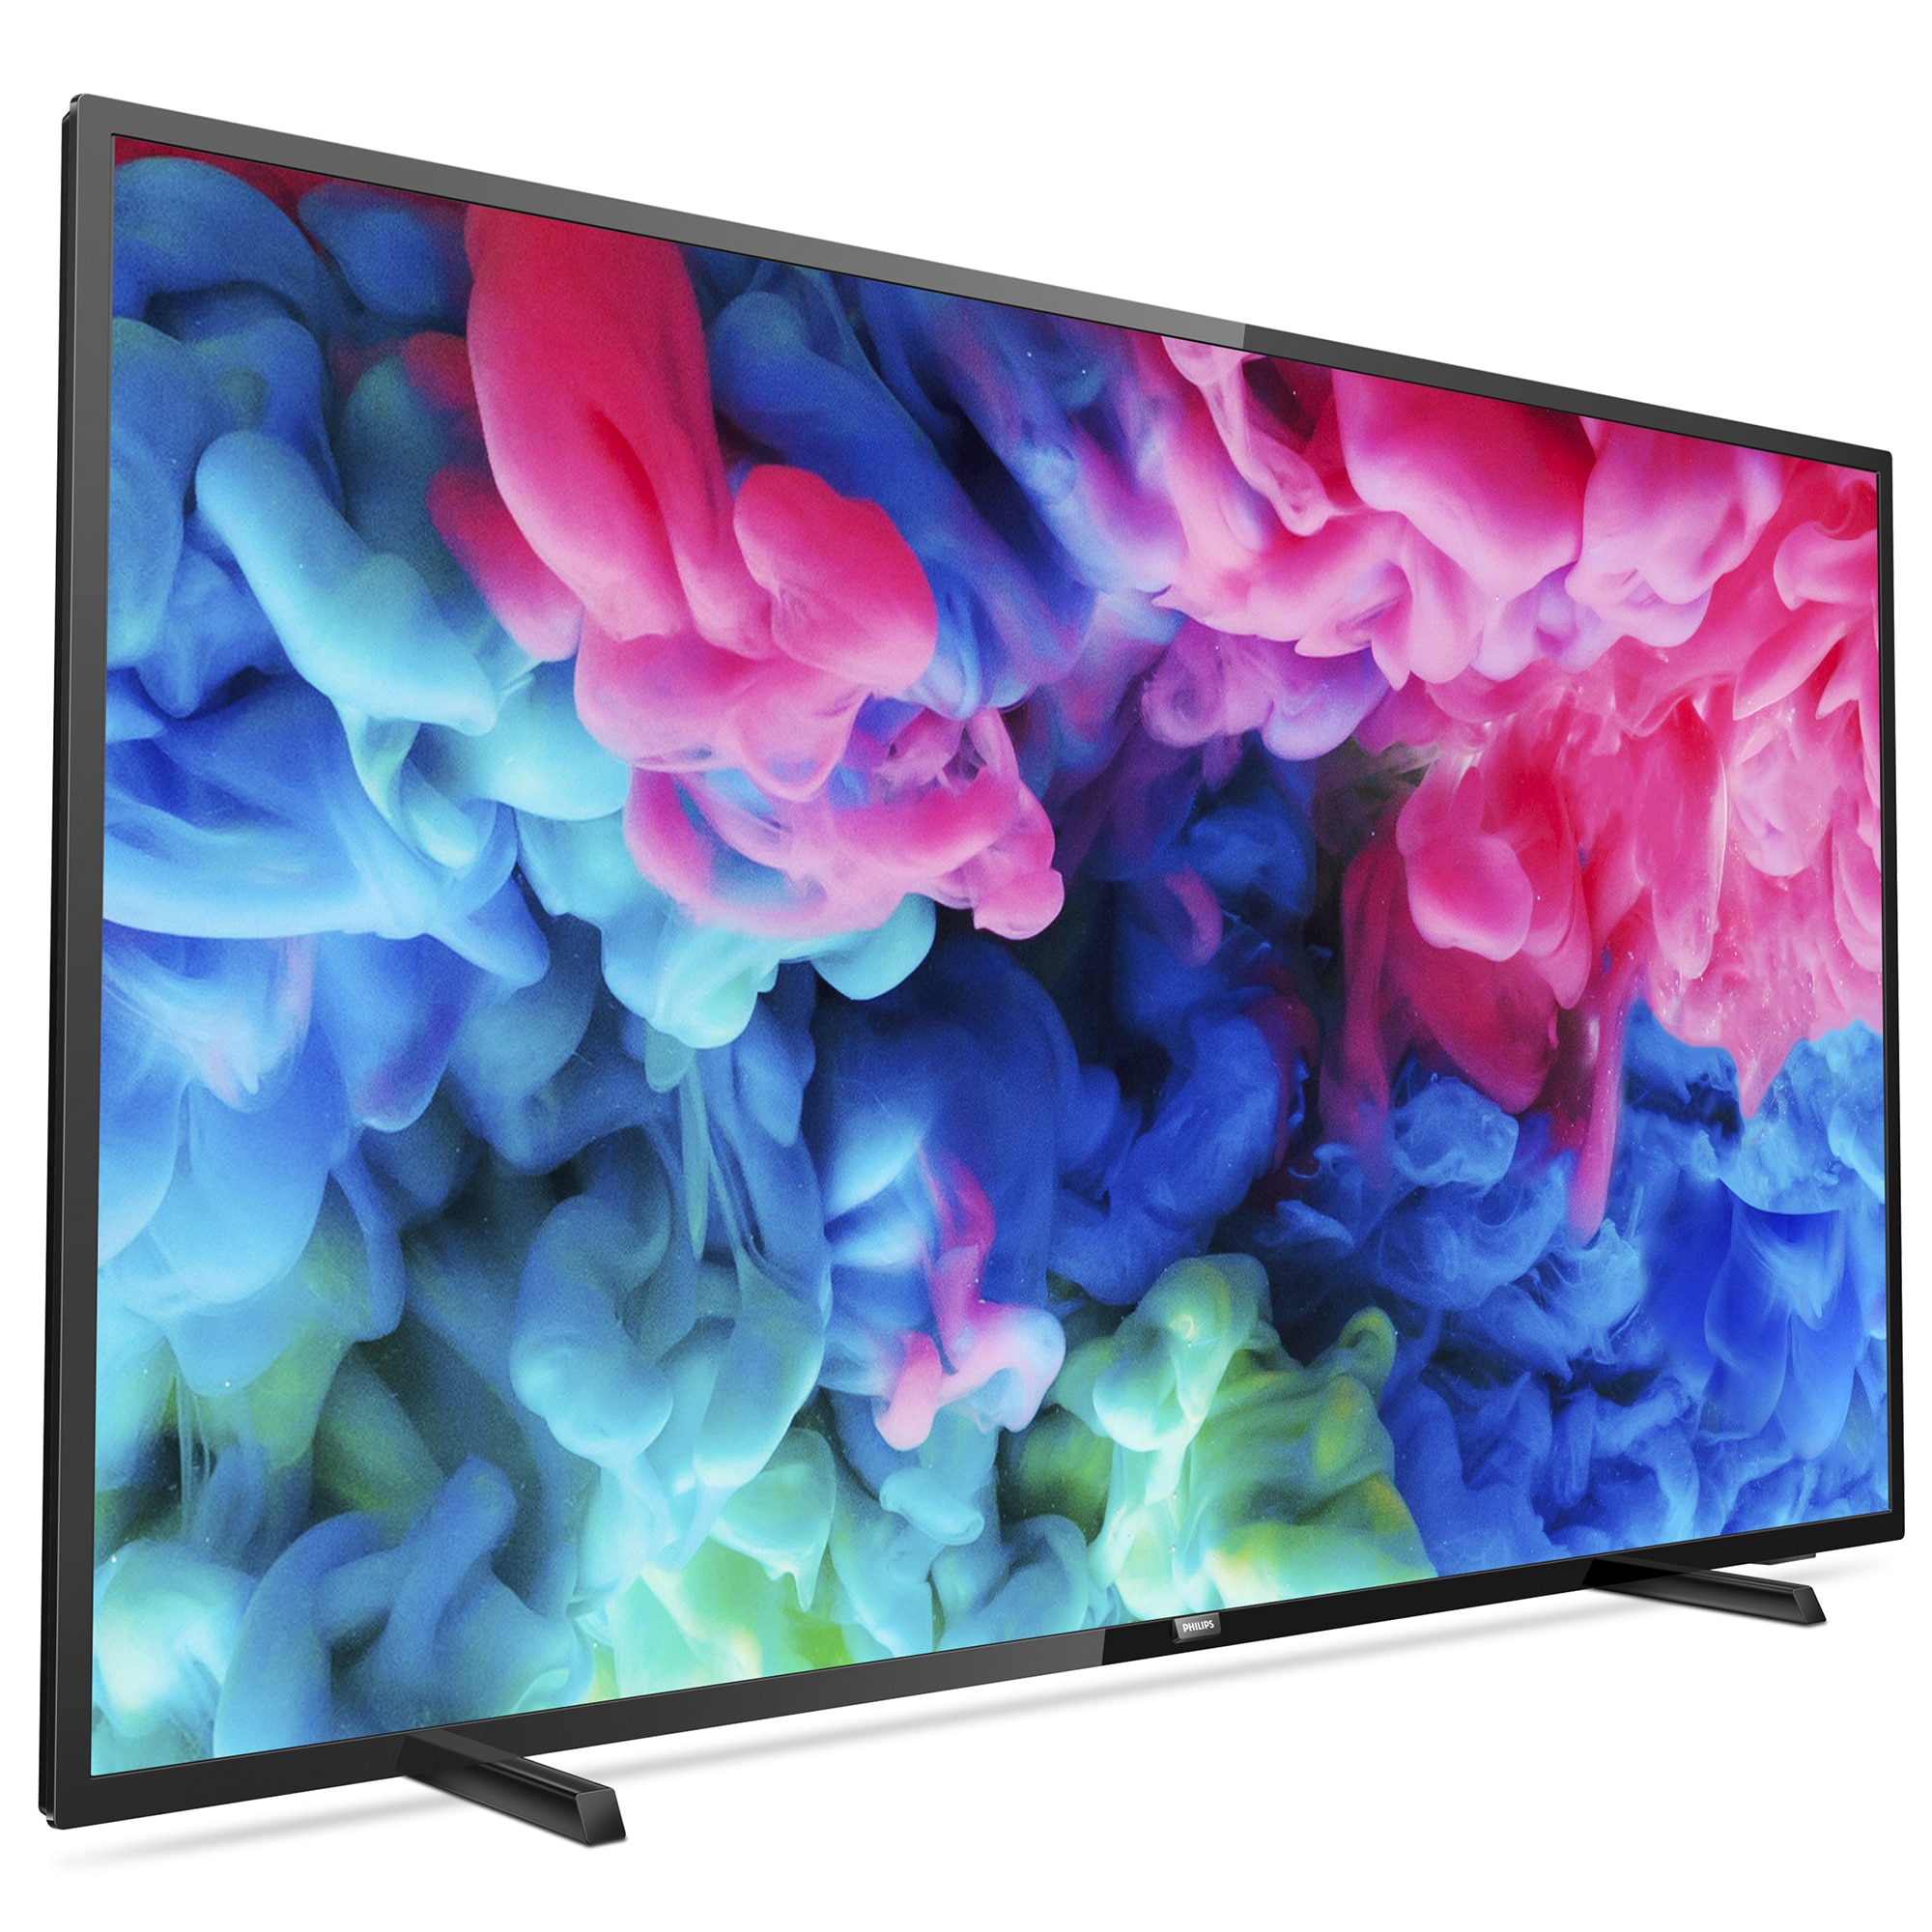 Strawberry competition Shrink Televizor LED Smart Philips, 139 cm, 55PUS6503/12, 4K Ultra HD, Clasa A+ -  eMAG.ro